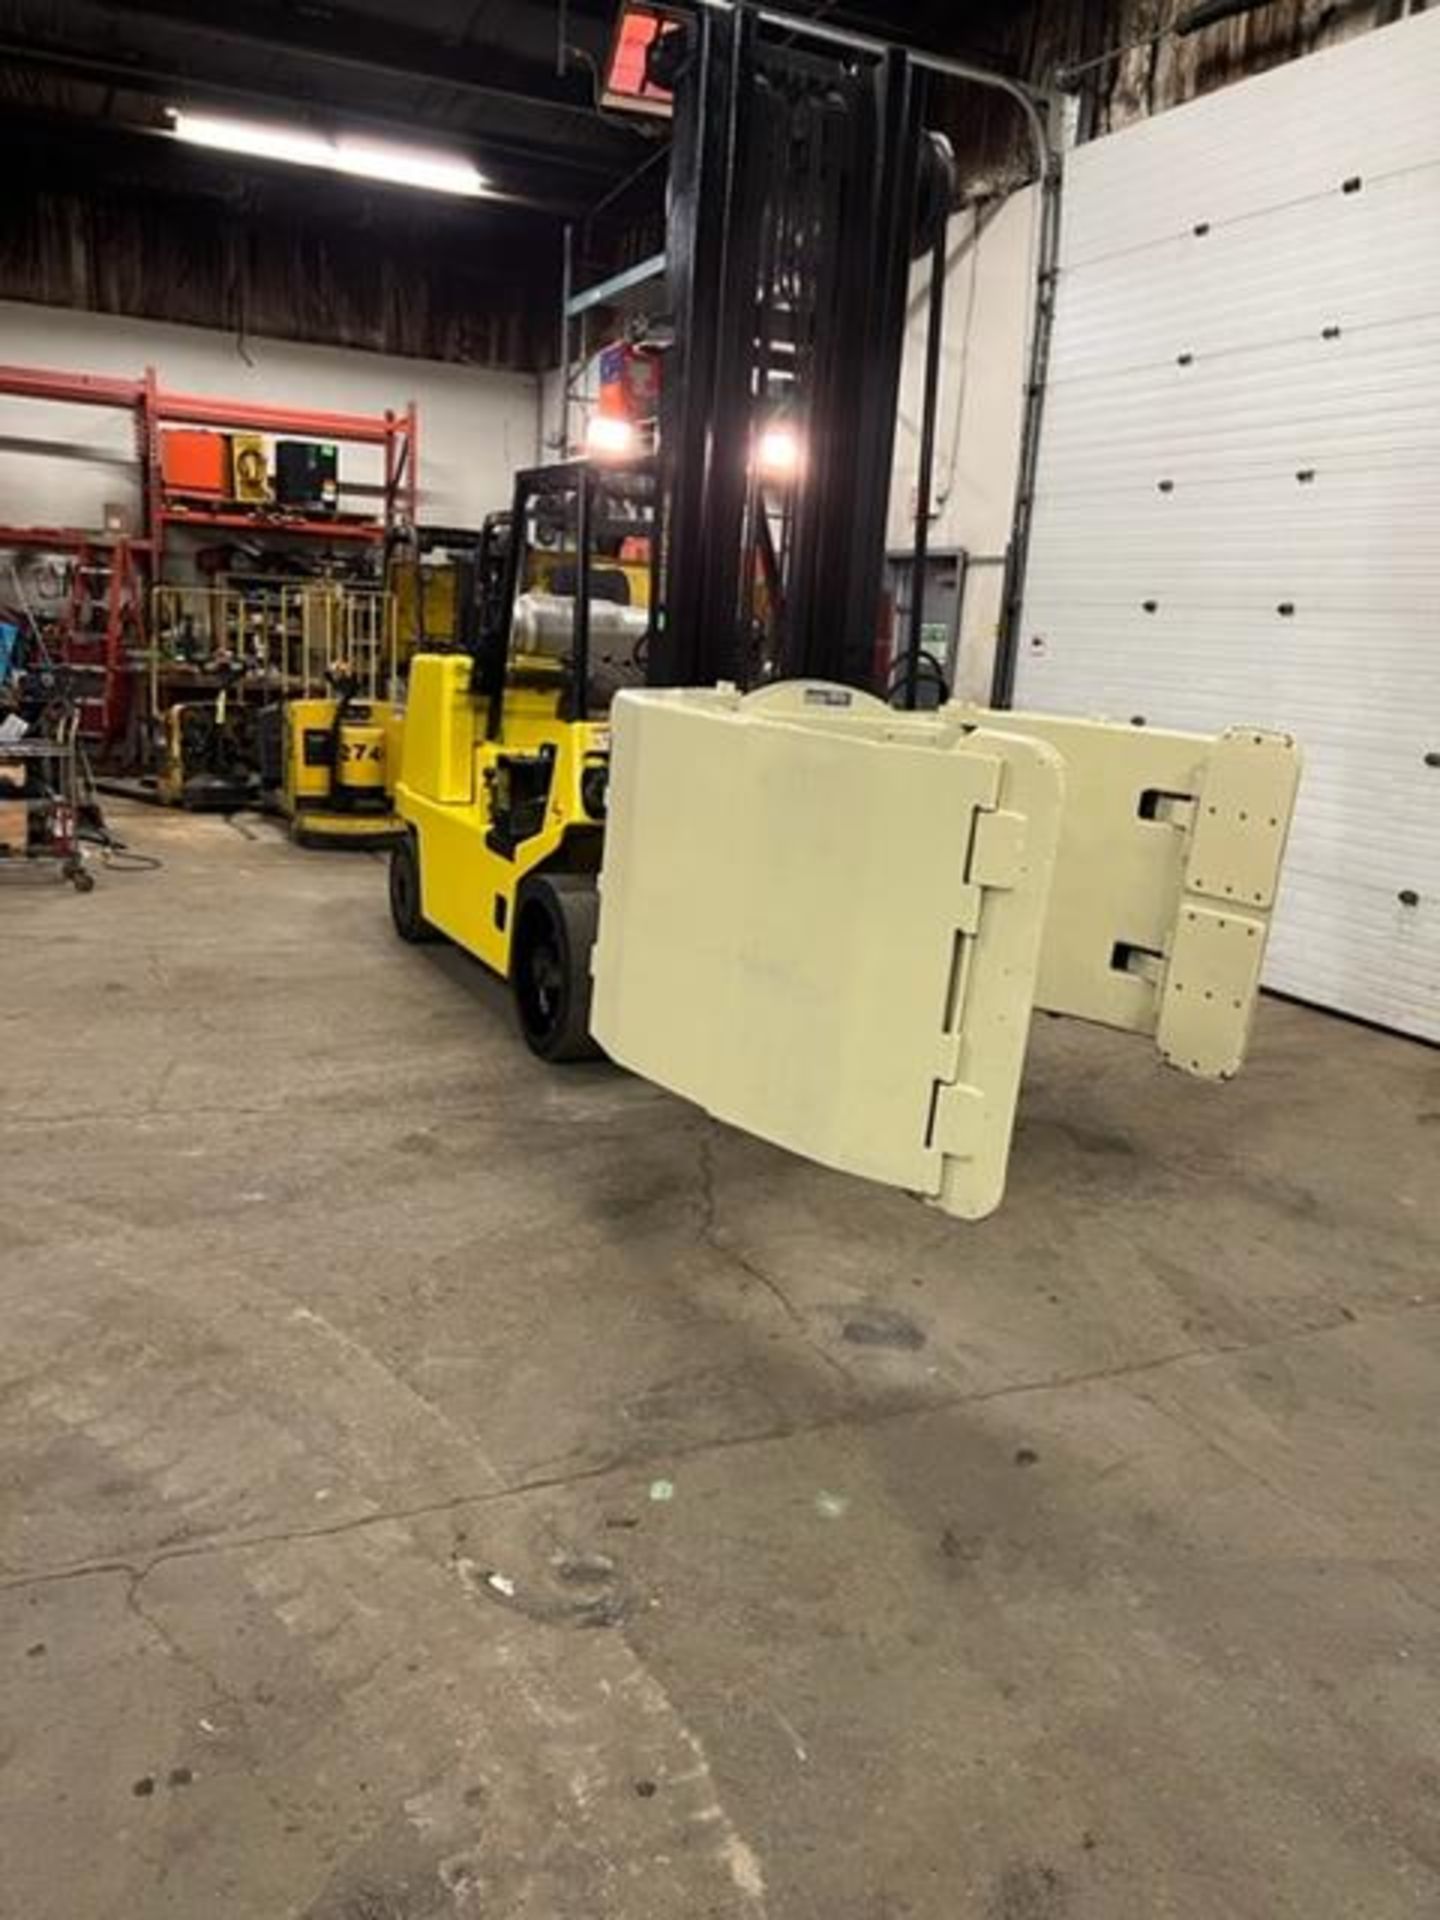 FREE CUSTOMS - Hyster model 155 15,500lbs Capacity OUTDOOR Forklift LPG (propane) Cascade Clamp - Image 2 of 4